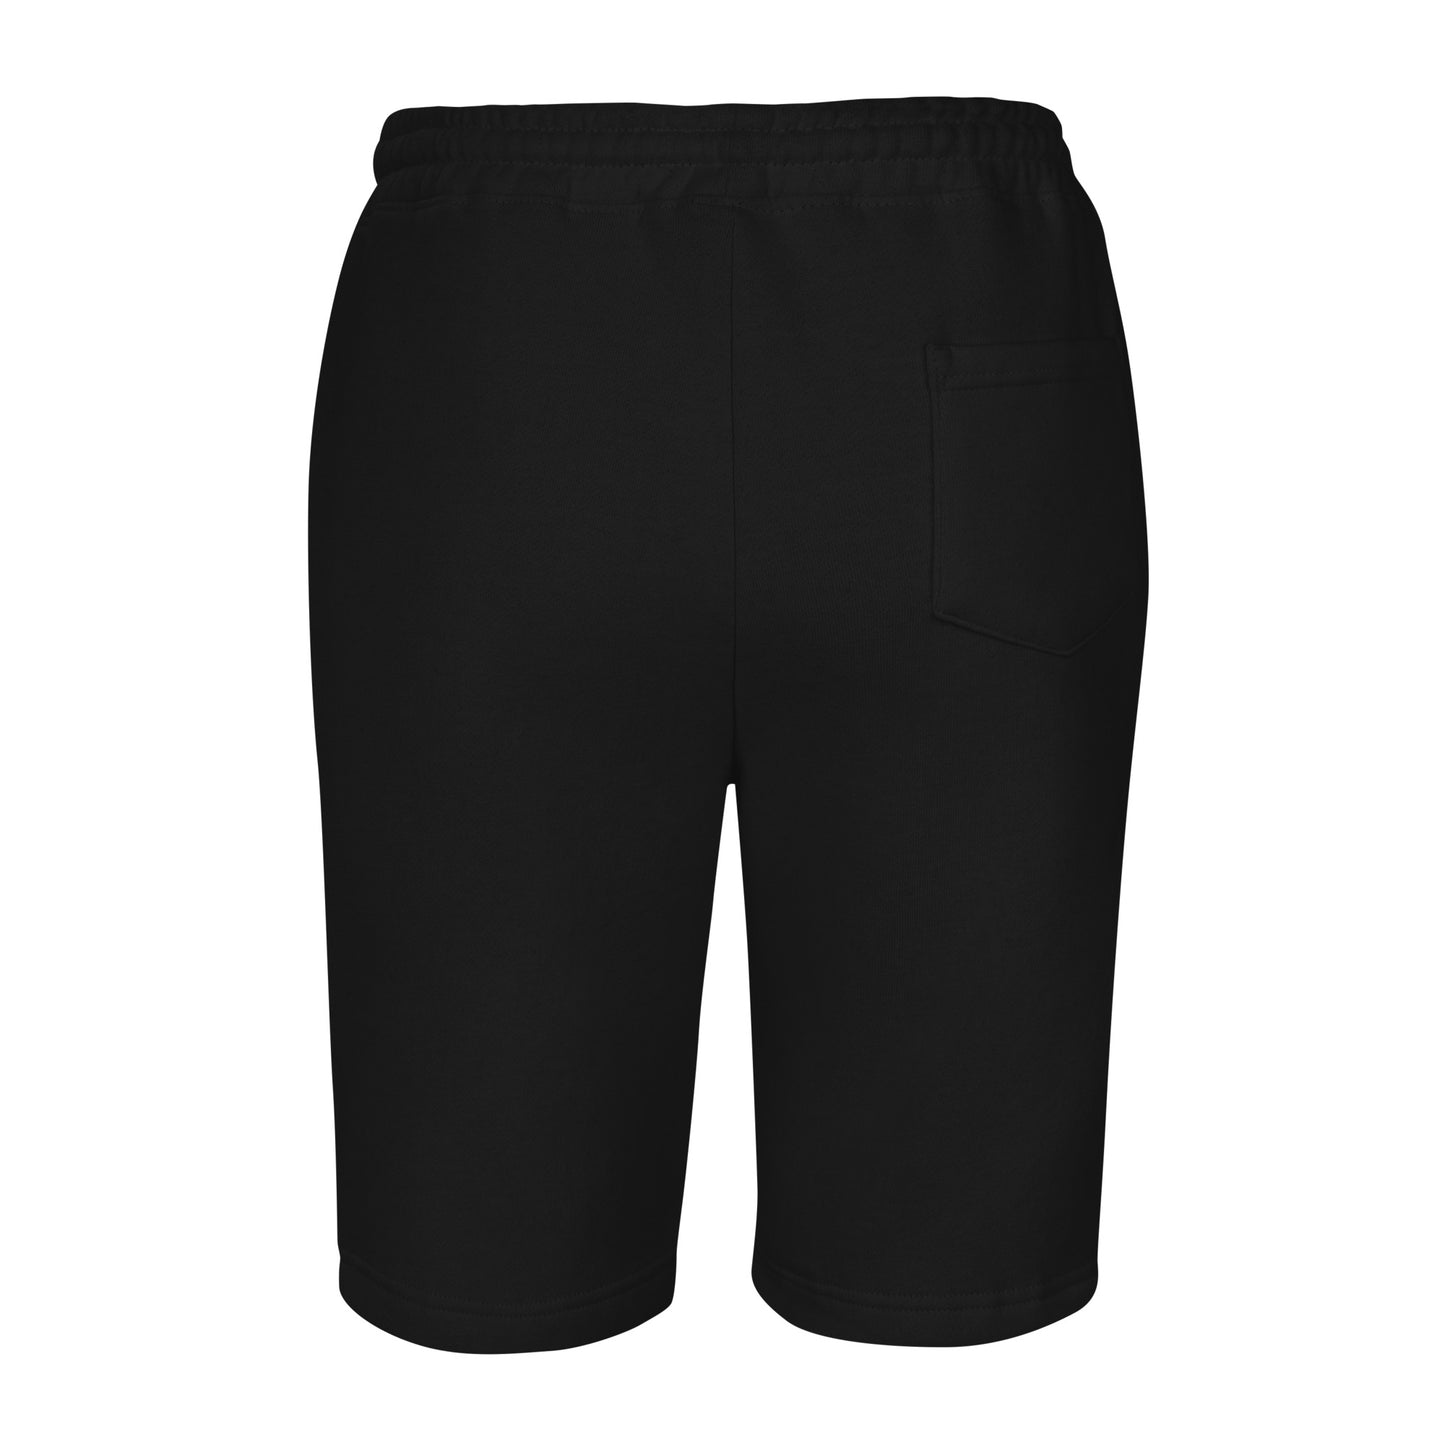 STAY THE COURSE Fleece Shorts